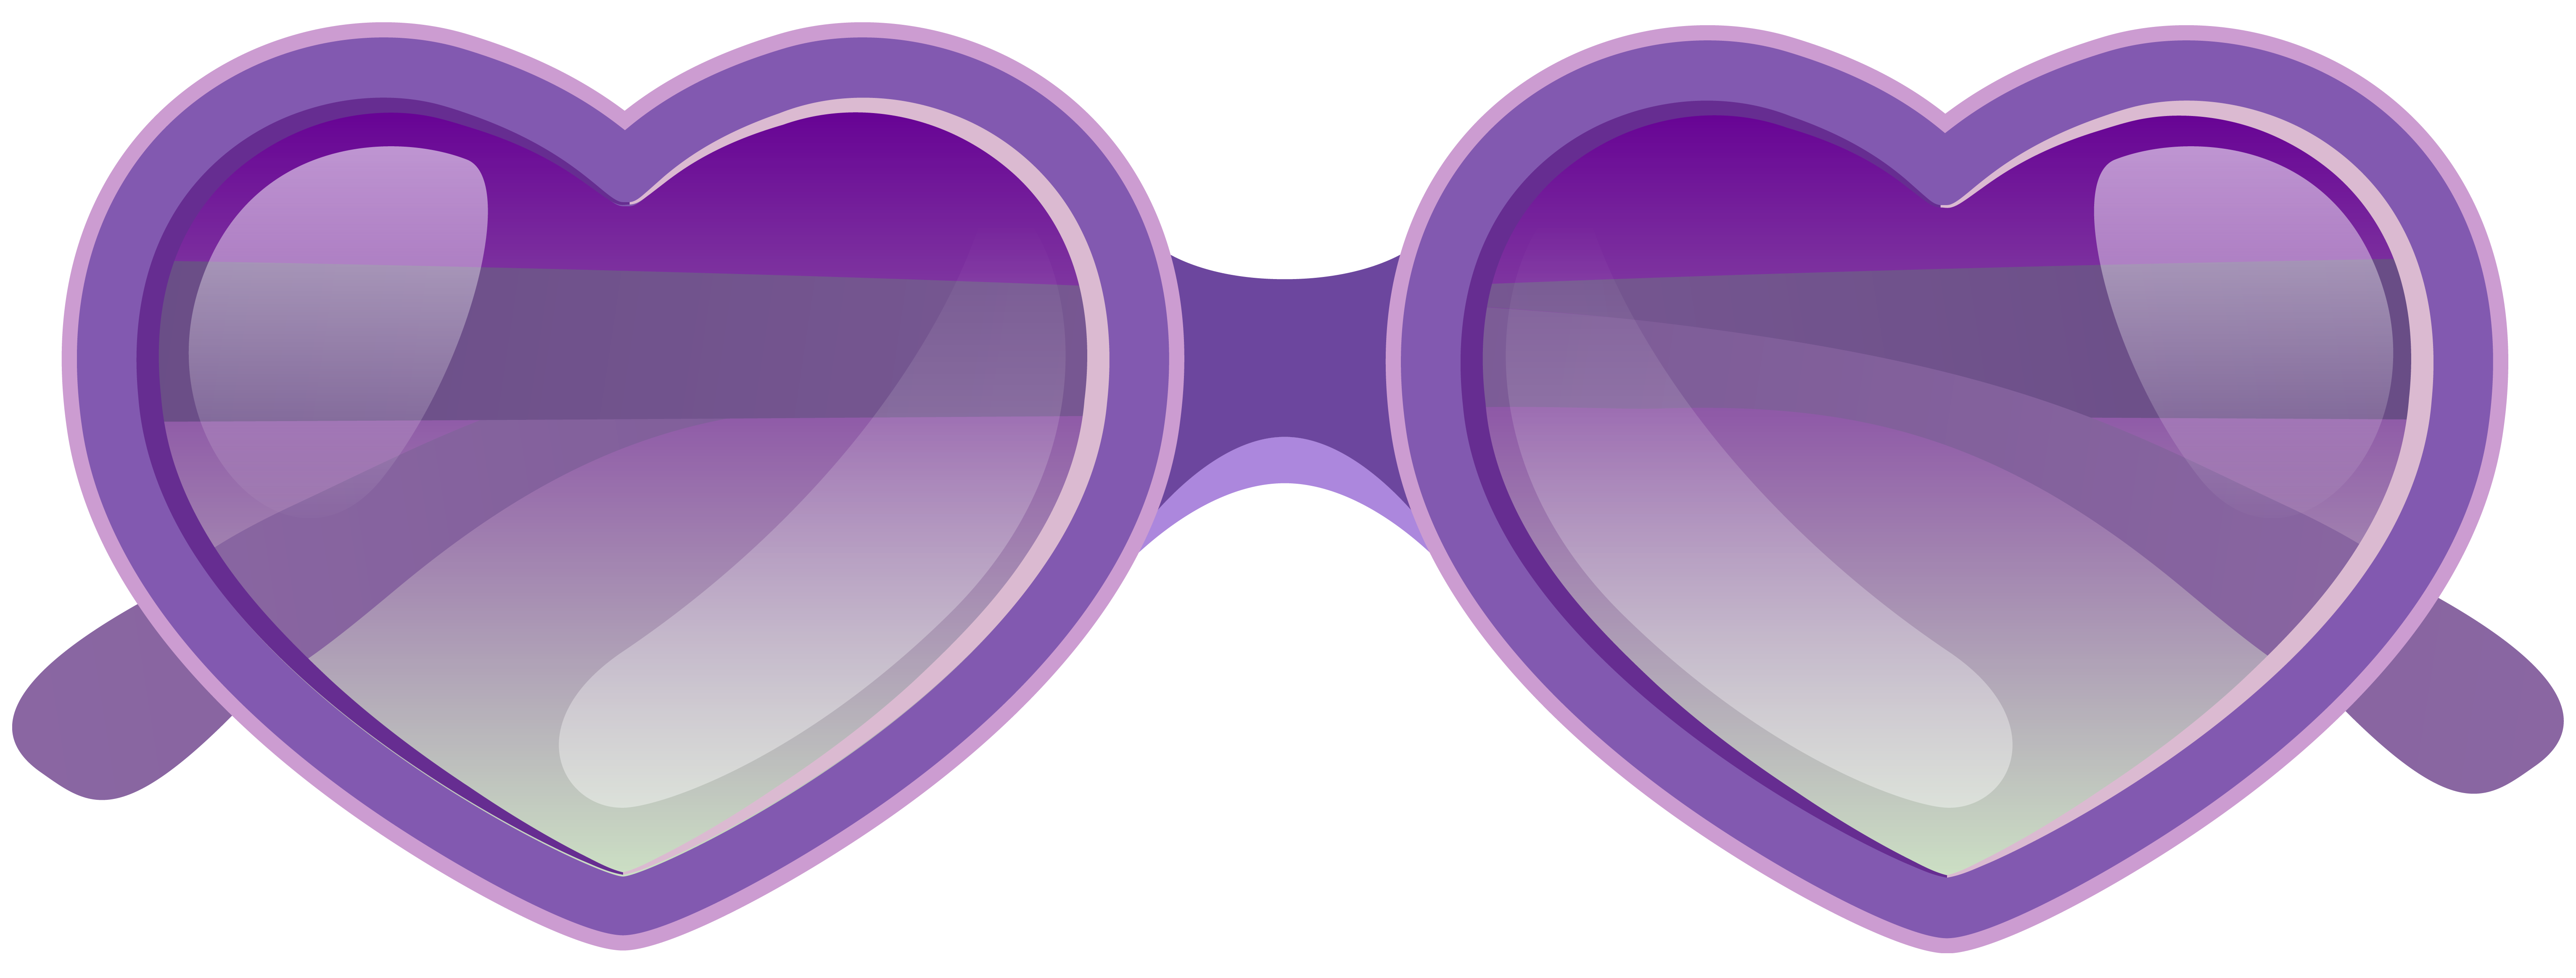 Sunglasses clipart purple. Heart png image gallery